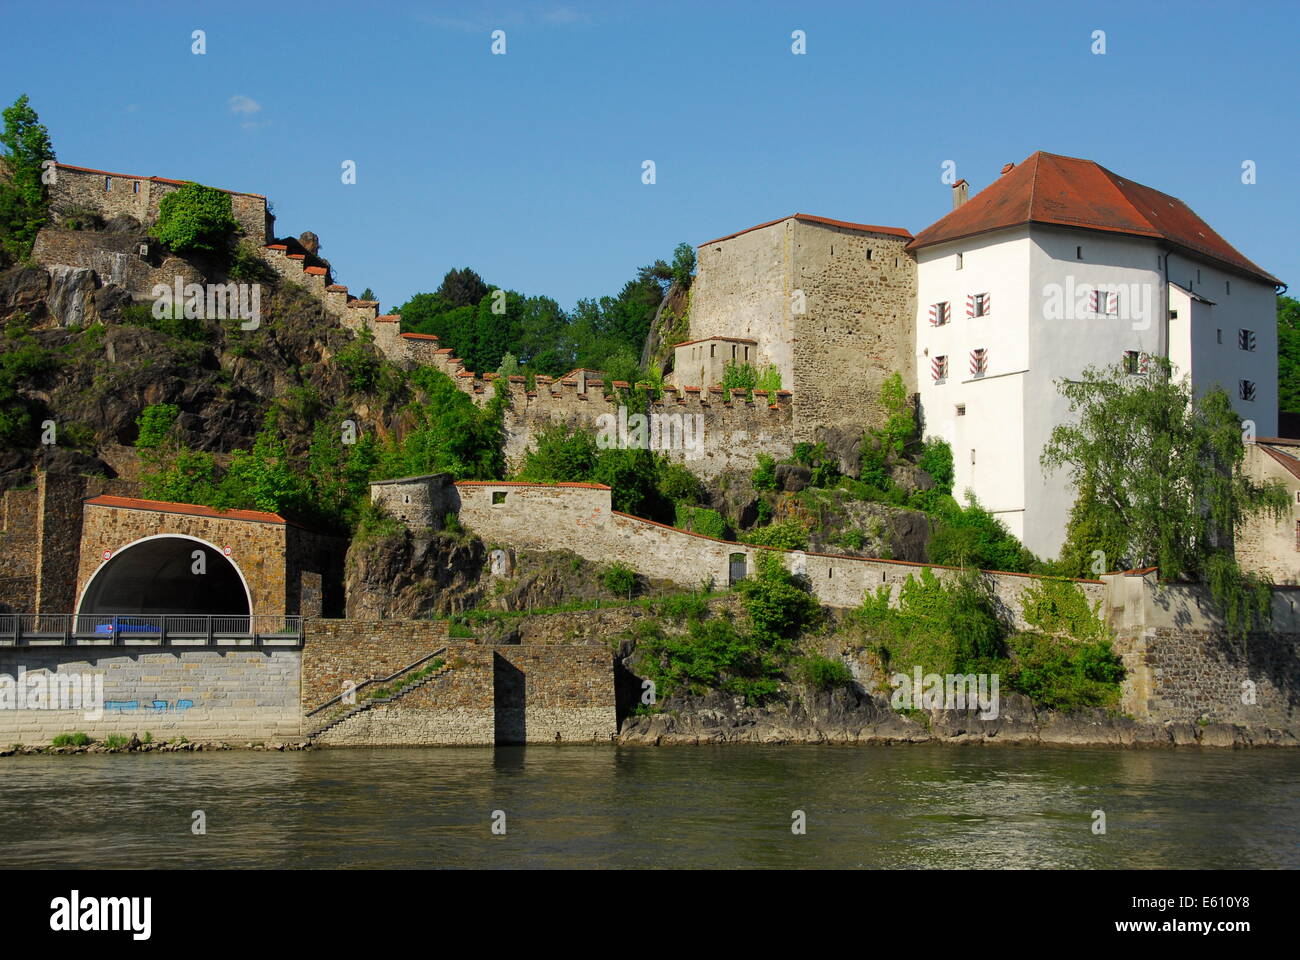 View of the town of Passau from the Danube River in Lower Bavaria, Germany. Stock Photo